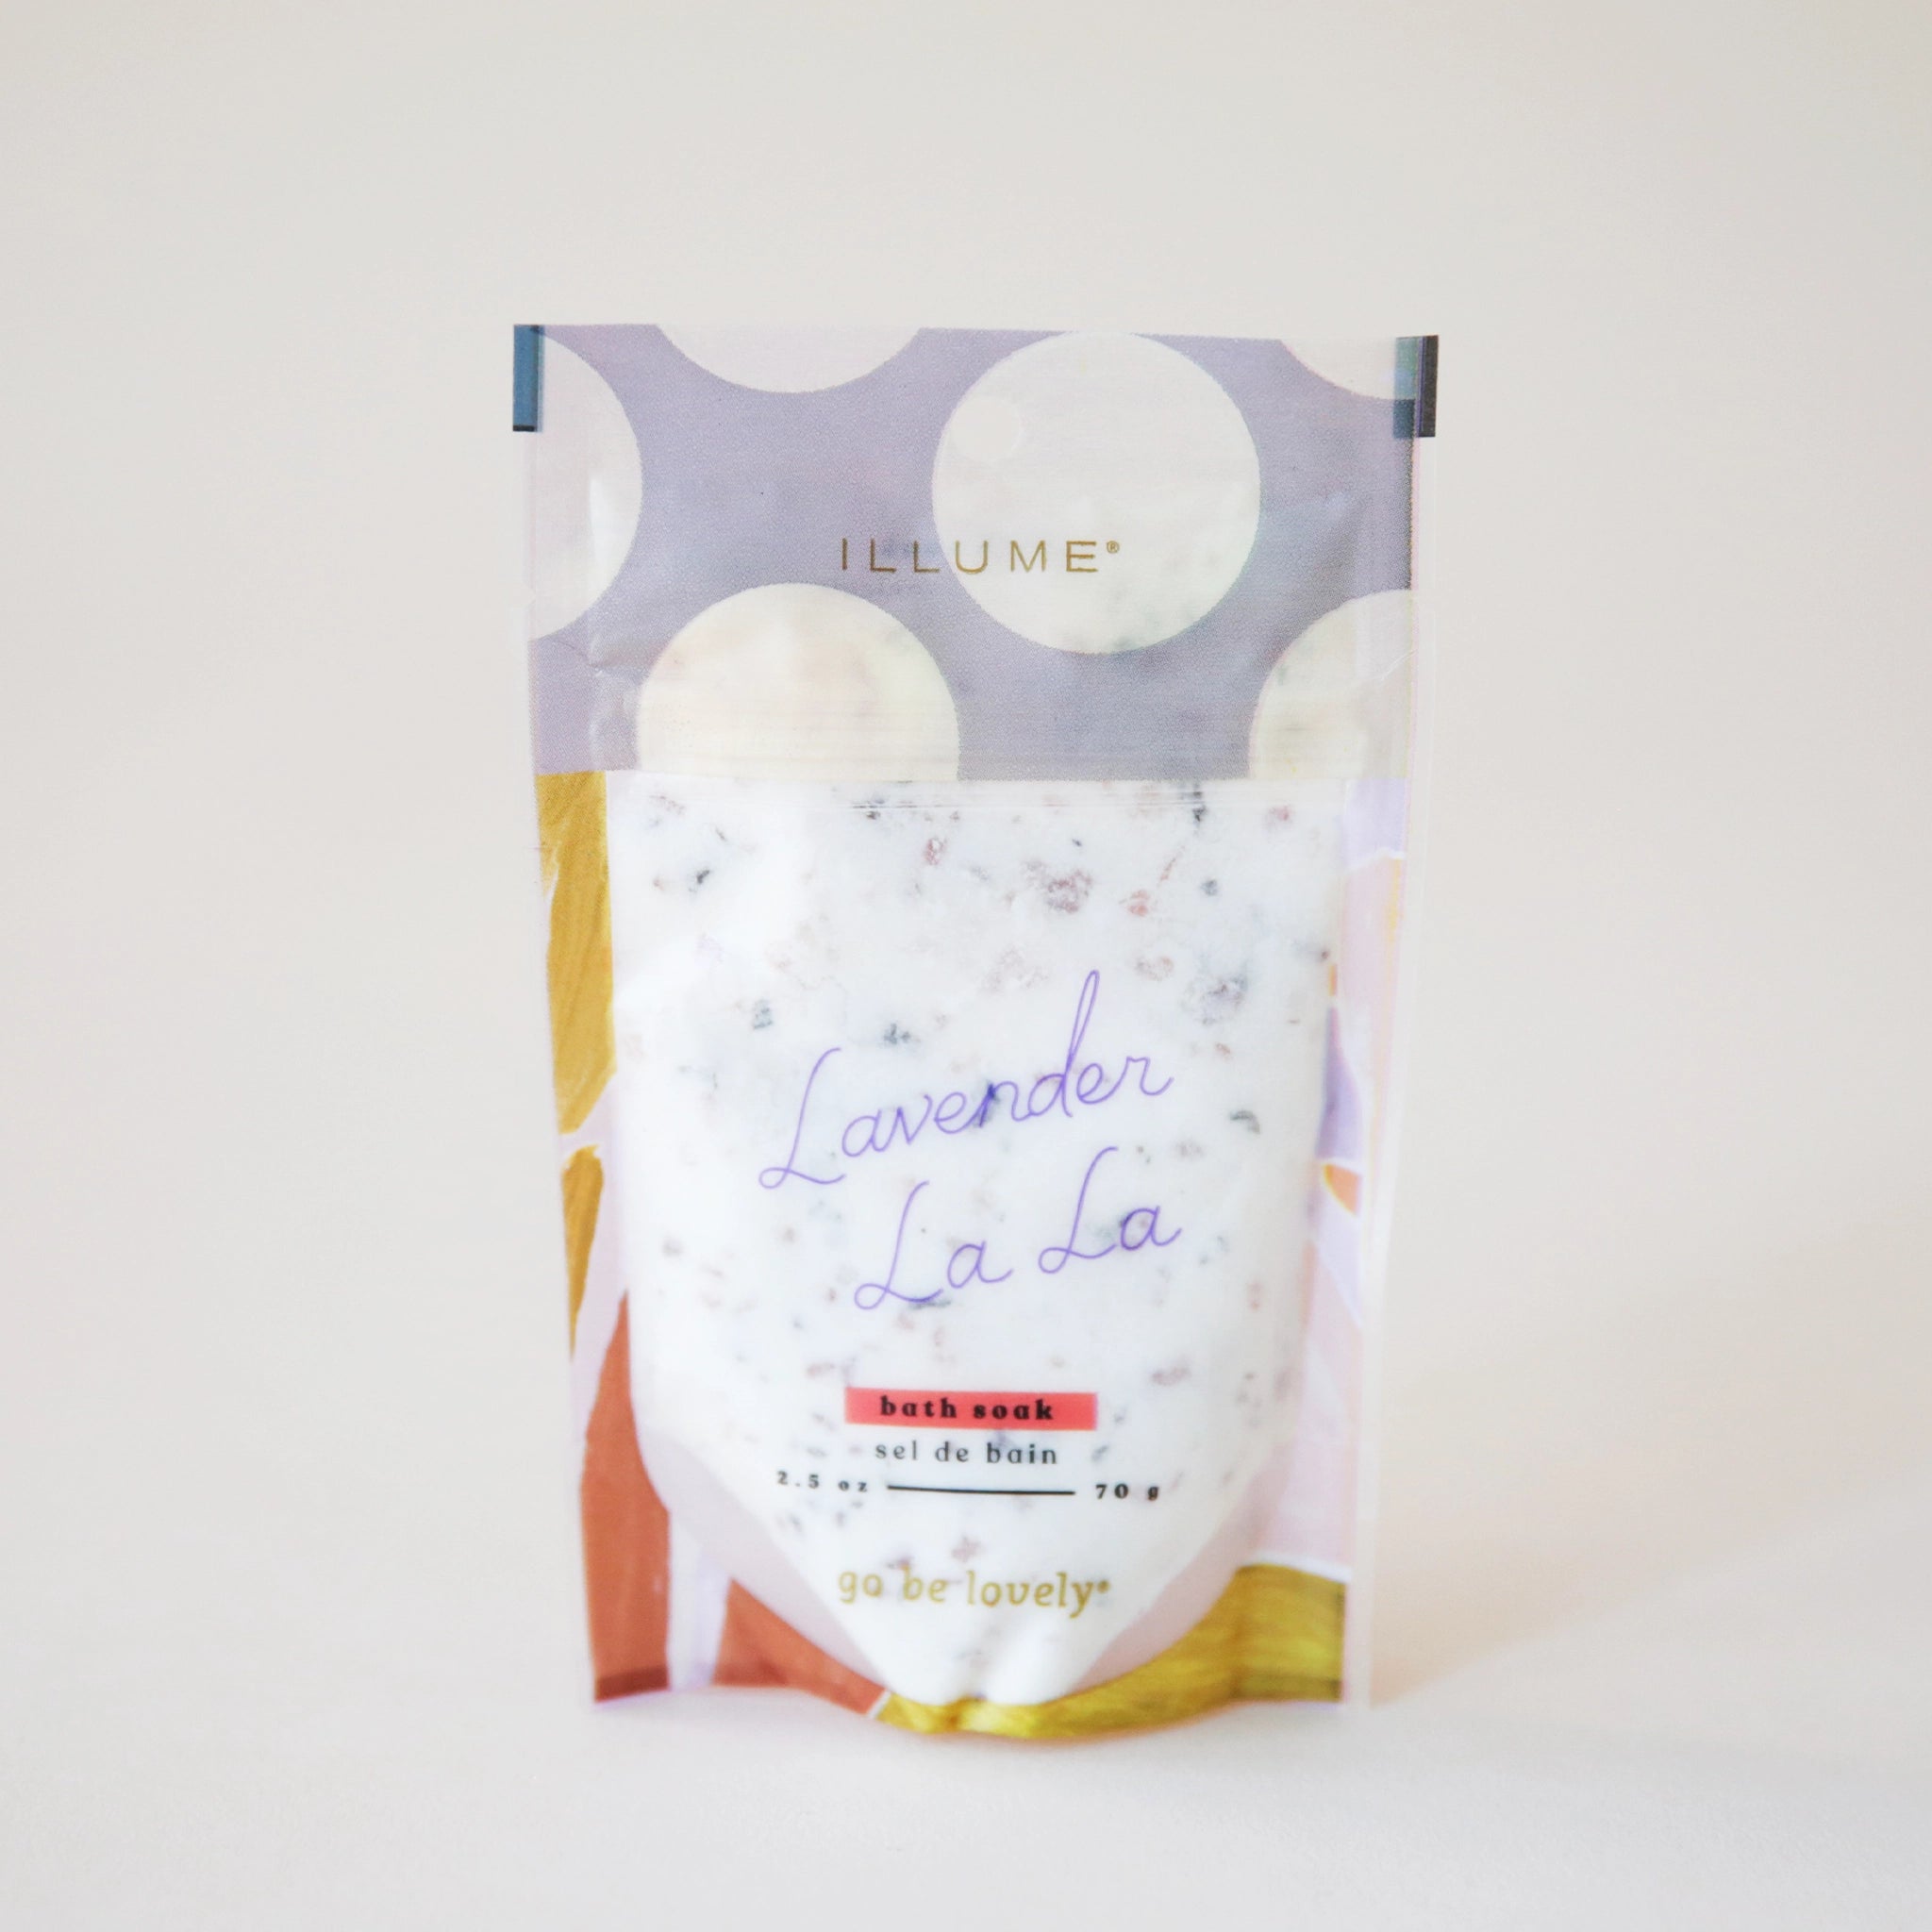 A bag of lavender scented bath soak, featuring a lavender and cream polka dot bag along with accents of yellow and rust and text on the front that reads, &quot;Lavender La La Bath Soak&quot;.